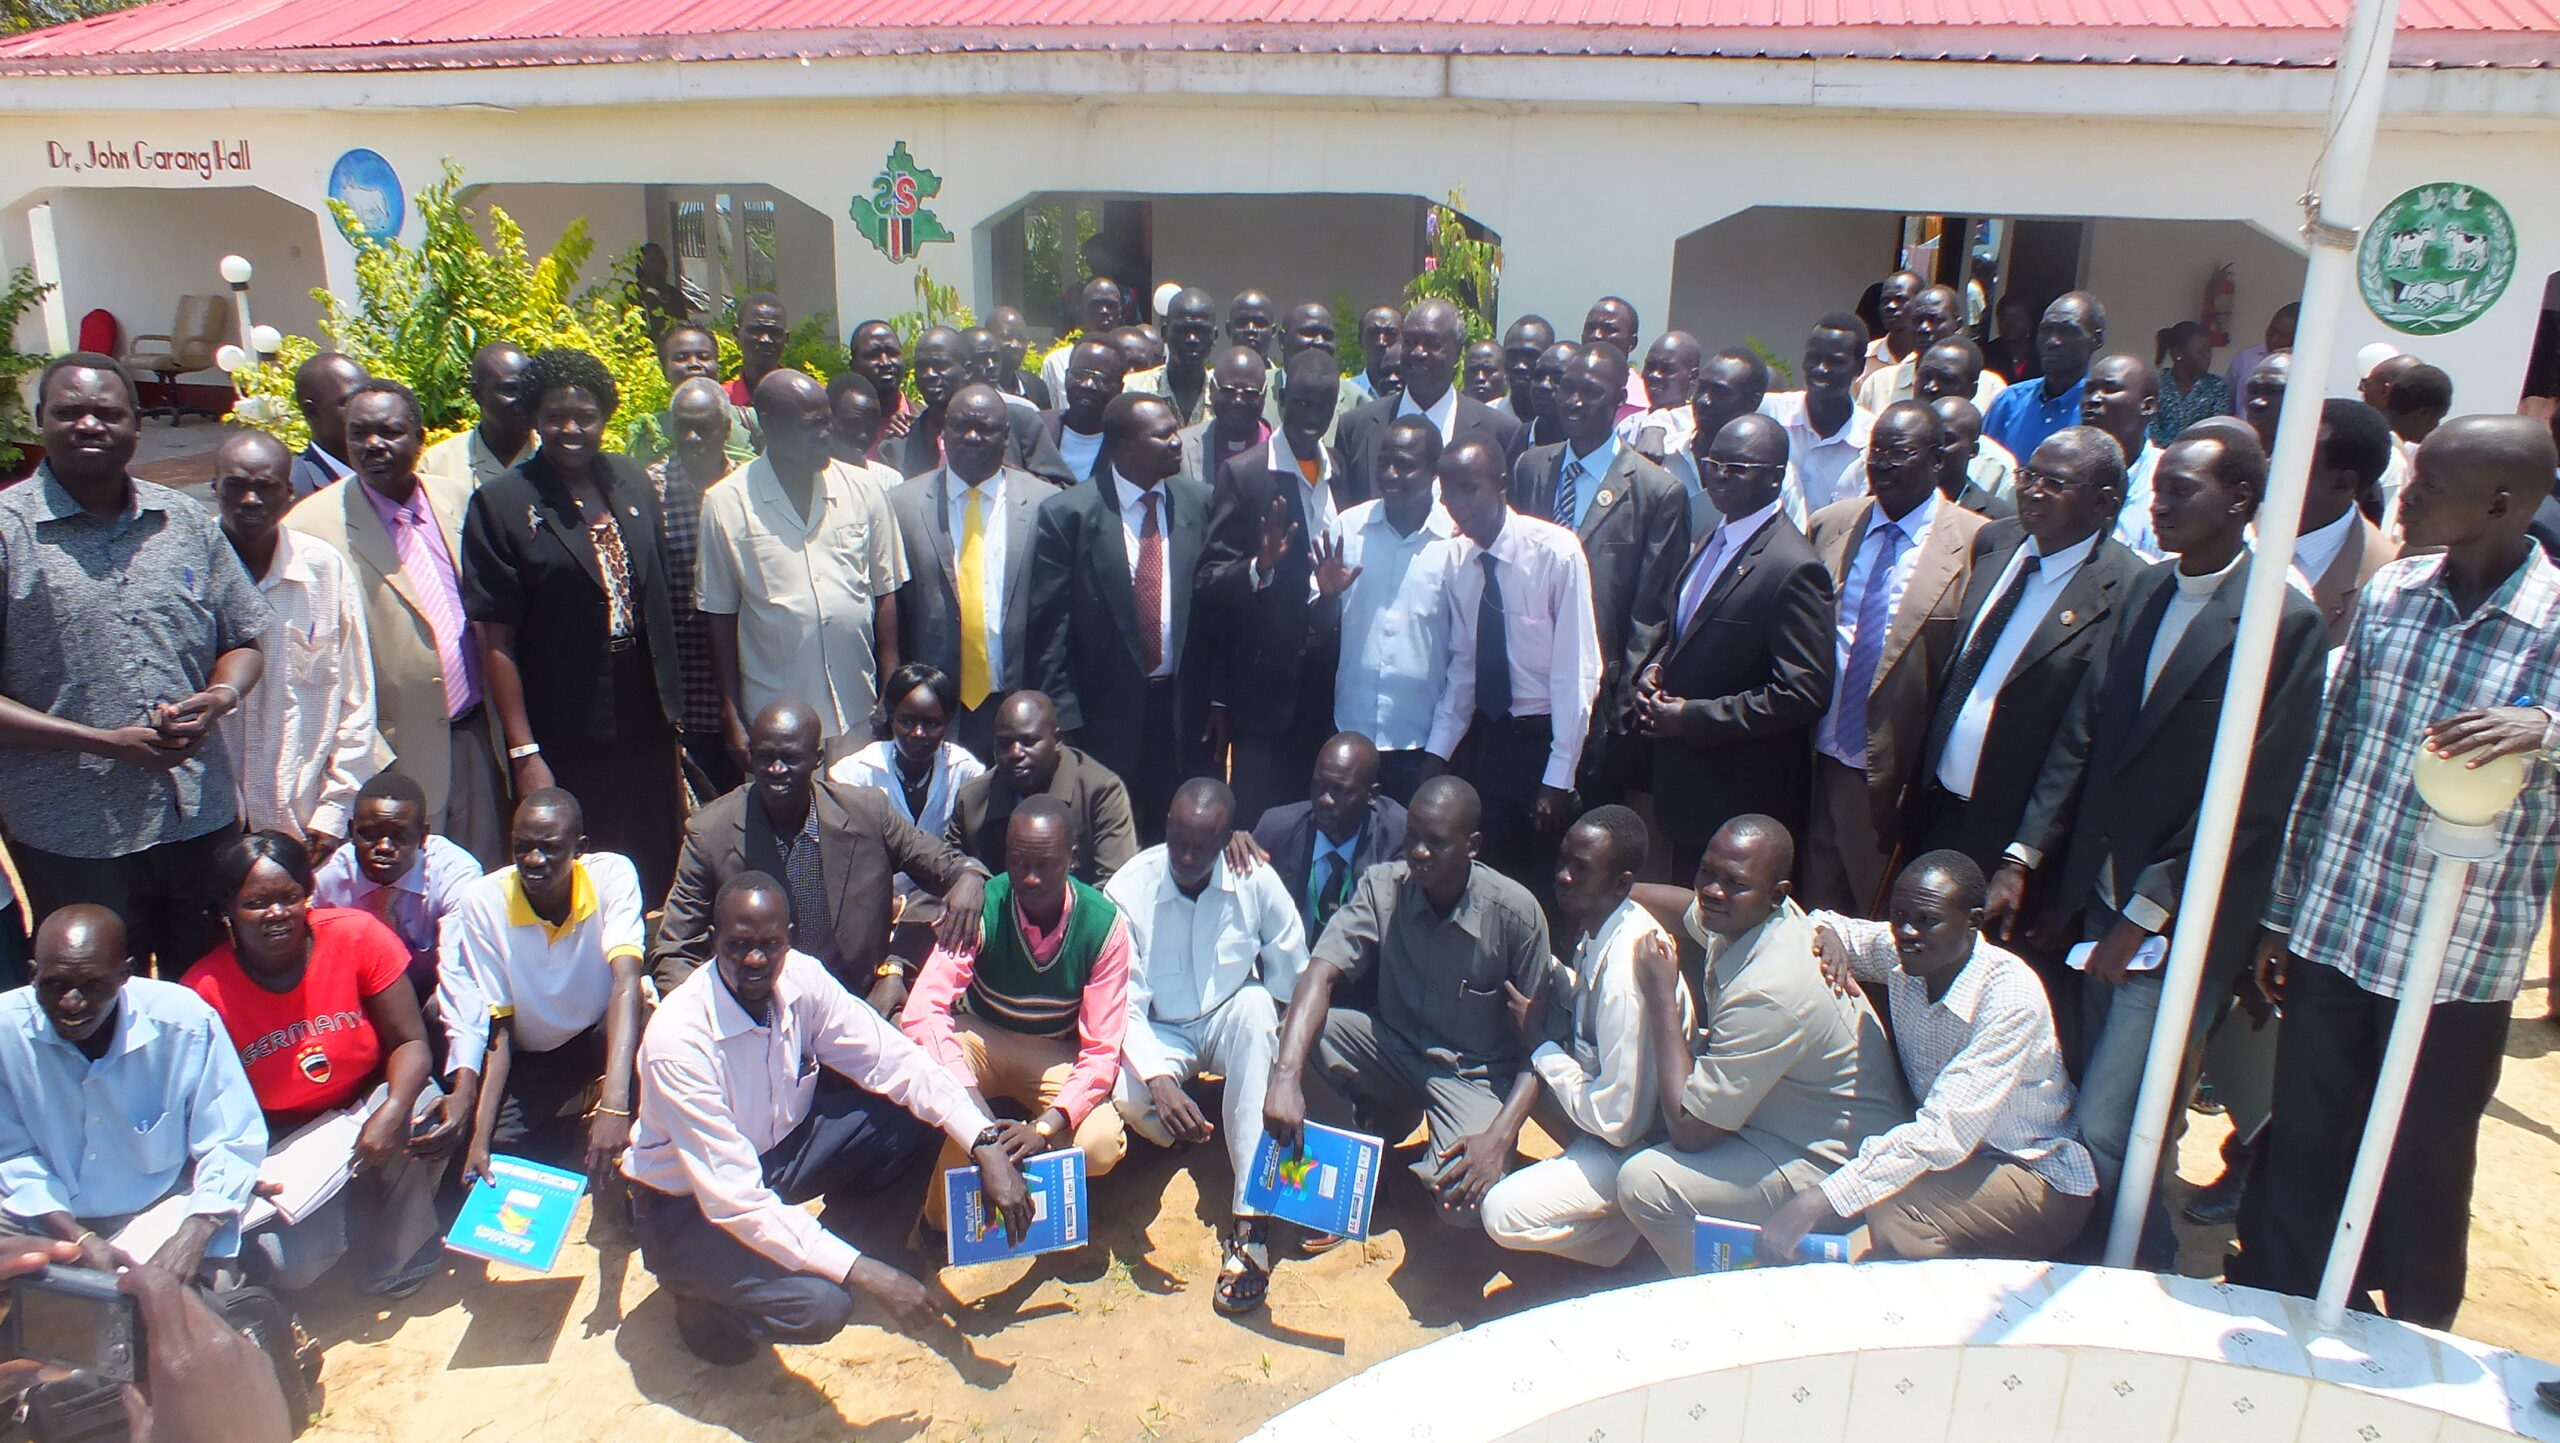 Jonglei state executive including the governor and his deputy, MPs and youth at the South Sudan Hotel after a meeting, August 24, 2012 (ST)